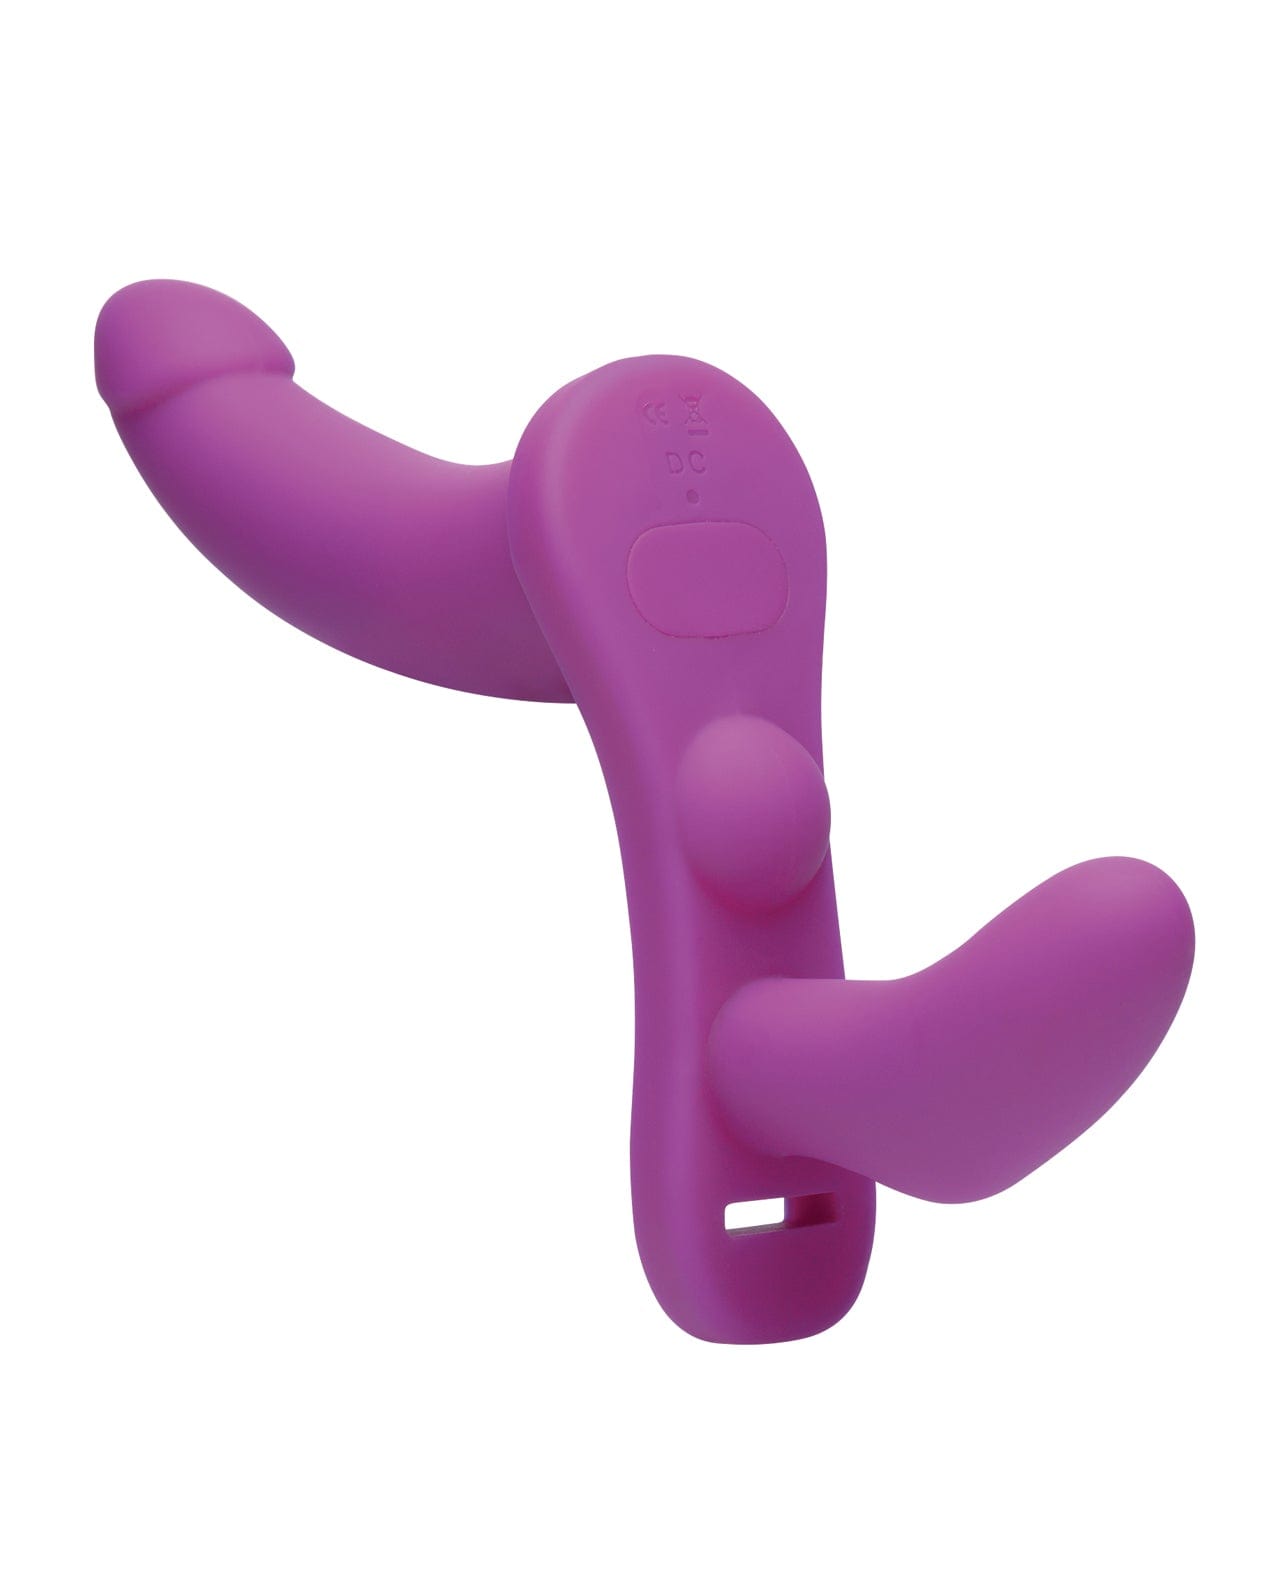 Strap U Strap Ons Strap U Double Take Double Penetration Vibrating Strap On Harness - Purple at the Haus of Shag